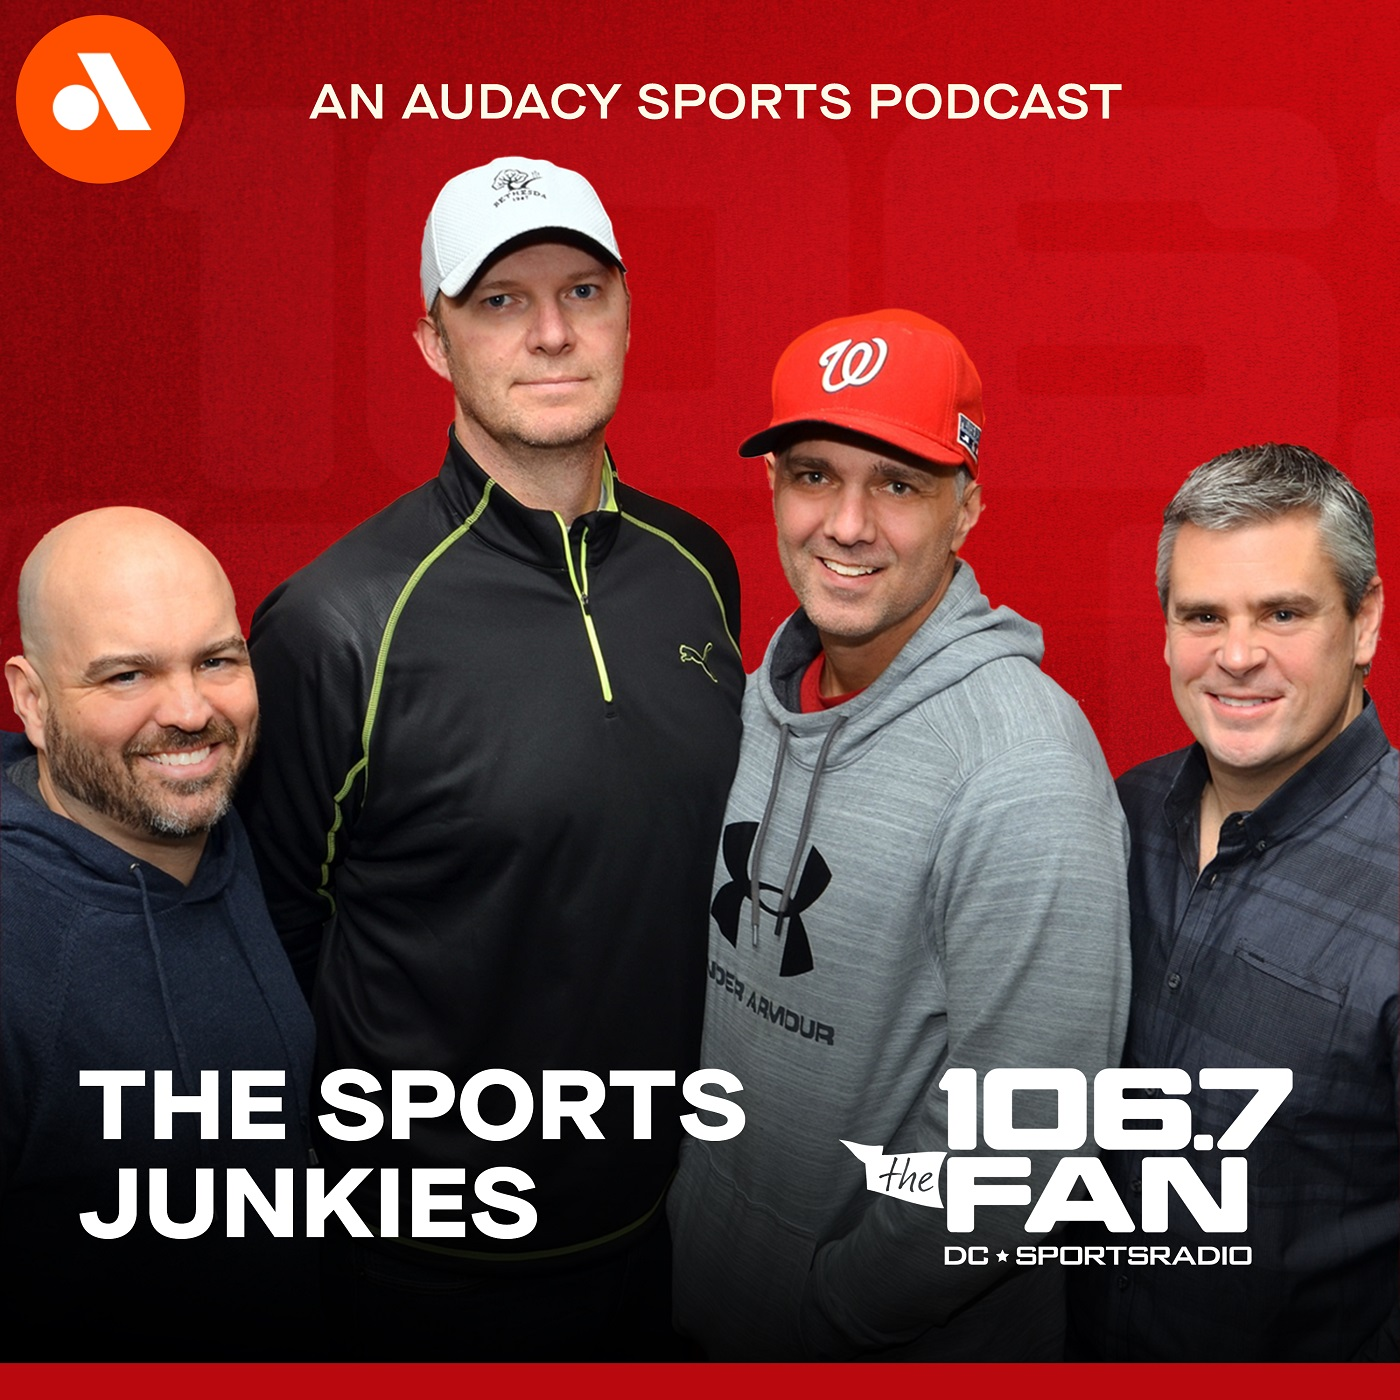 Sports Junkies 25th Anniversary Podcast: Cakes has to drive Lurch to work